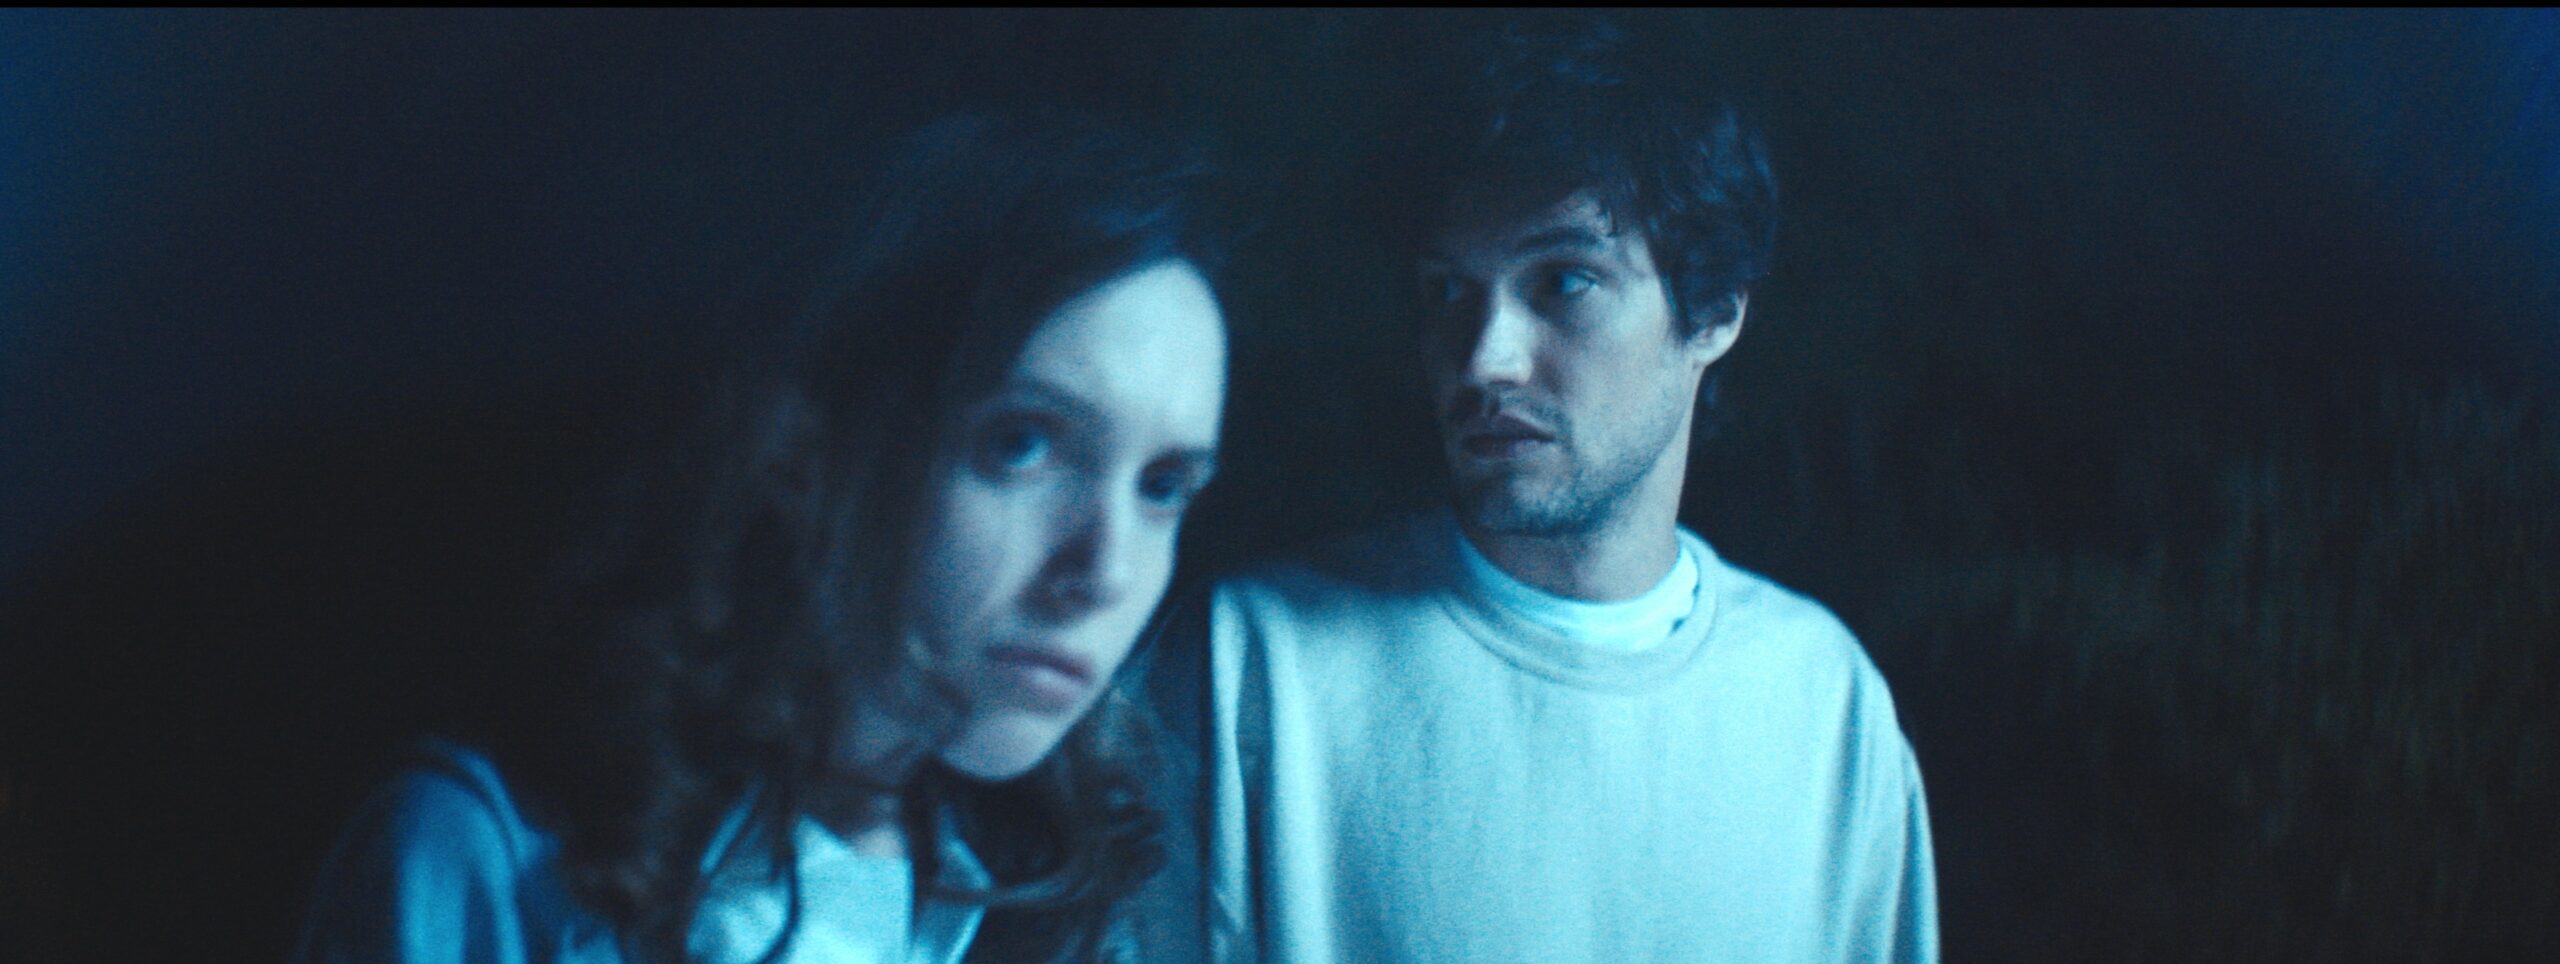 A still from Robert McMahon's film showing two people in close up bathed in a blue light with black bacgkround.